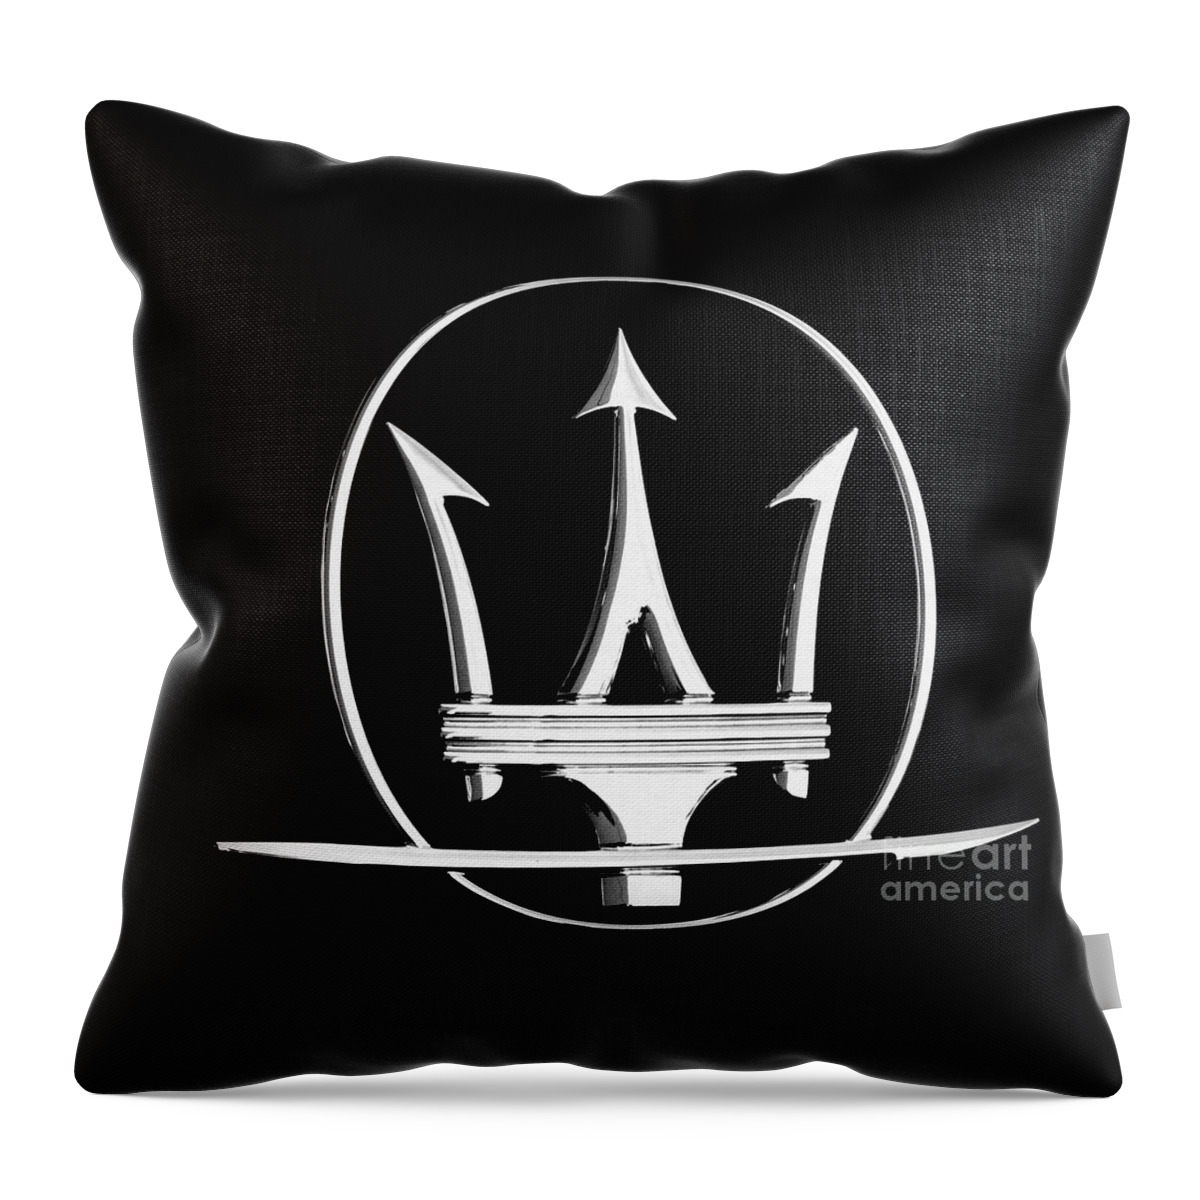 Maserati Throw Pillow featuring the photograph Maserati's Trident badge by Stefano Senise